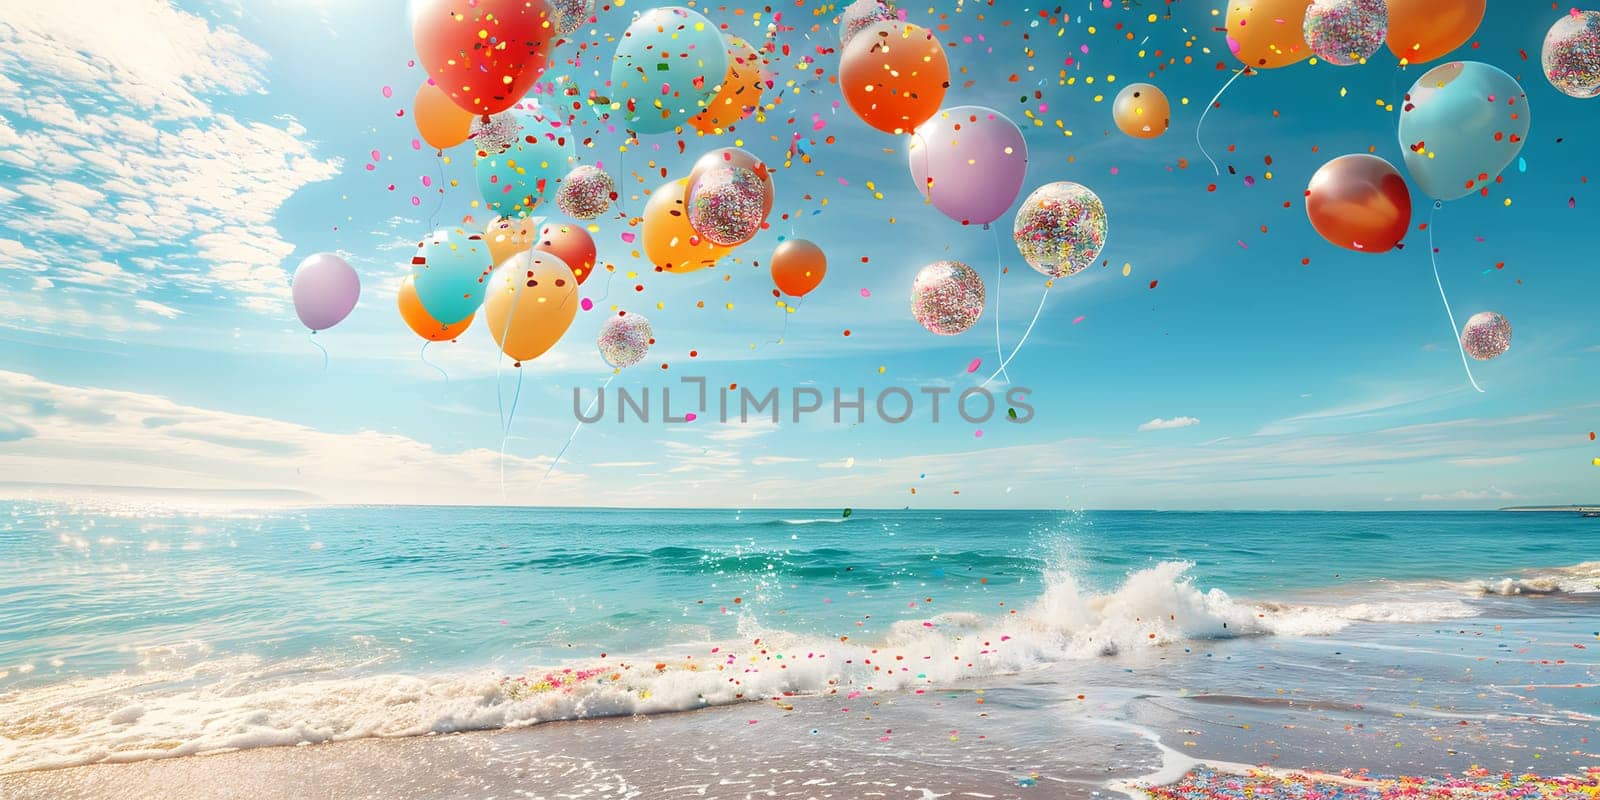 A bunch of azure balloons float in the sky above a beach, adding a splash of color to the natural landscape. The happy scene is reflected in the crystalclear aqua water below